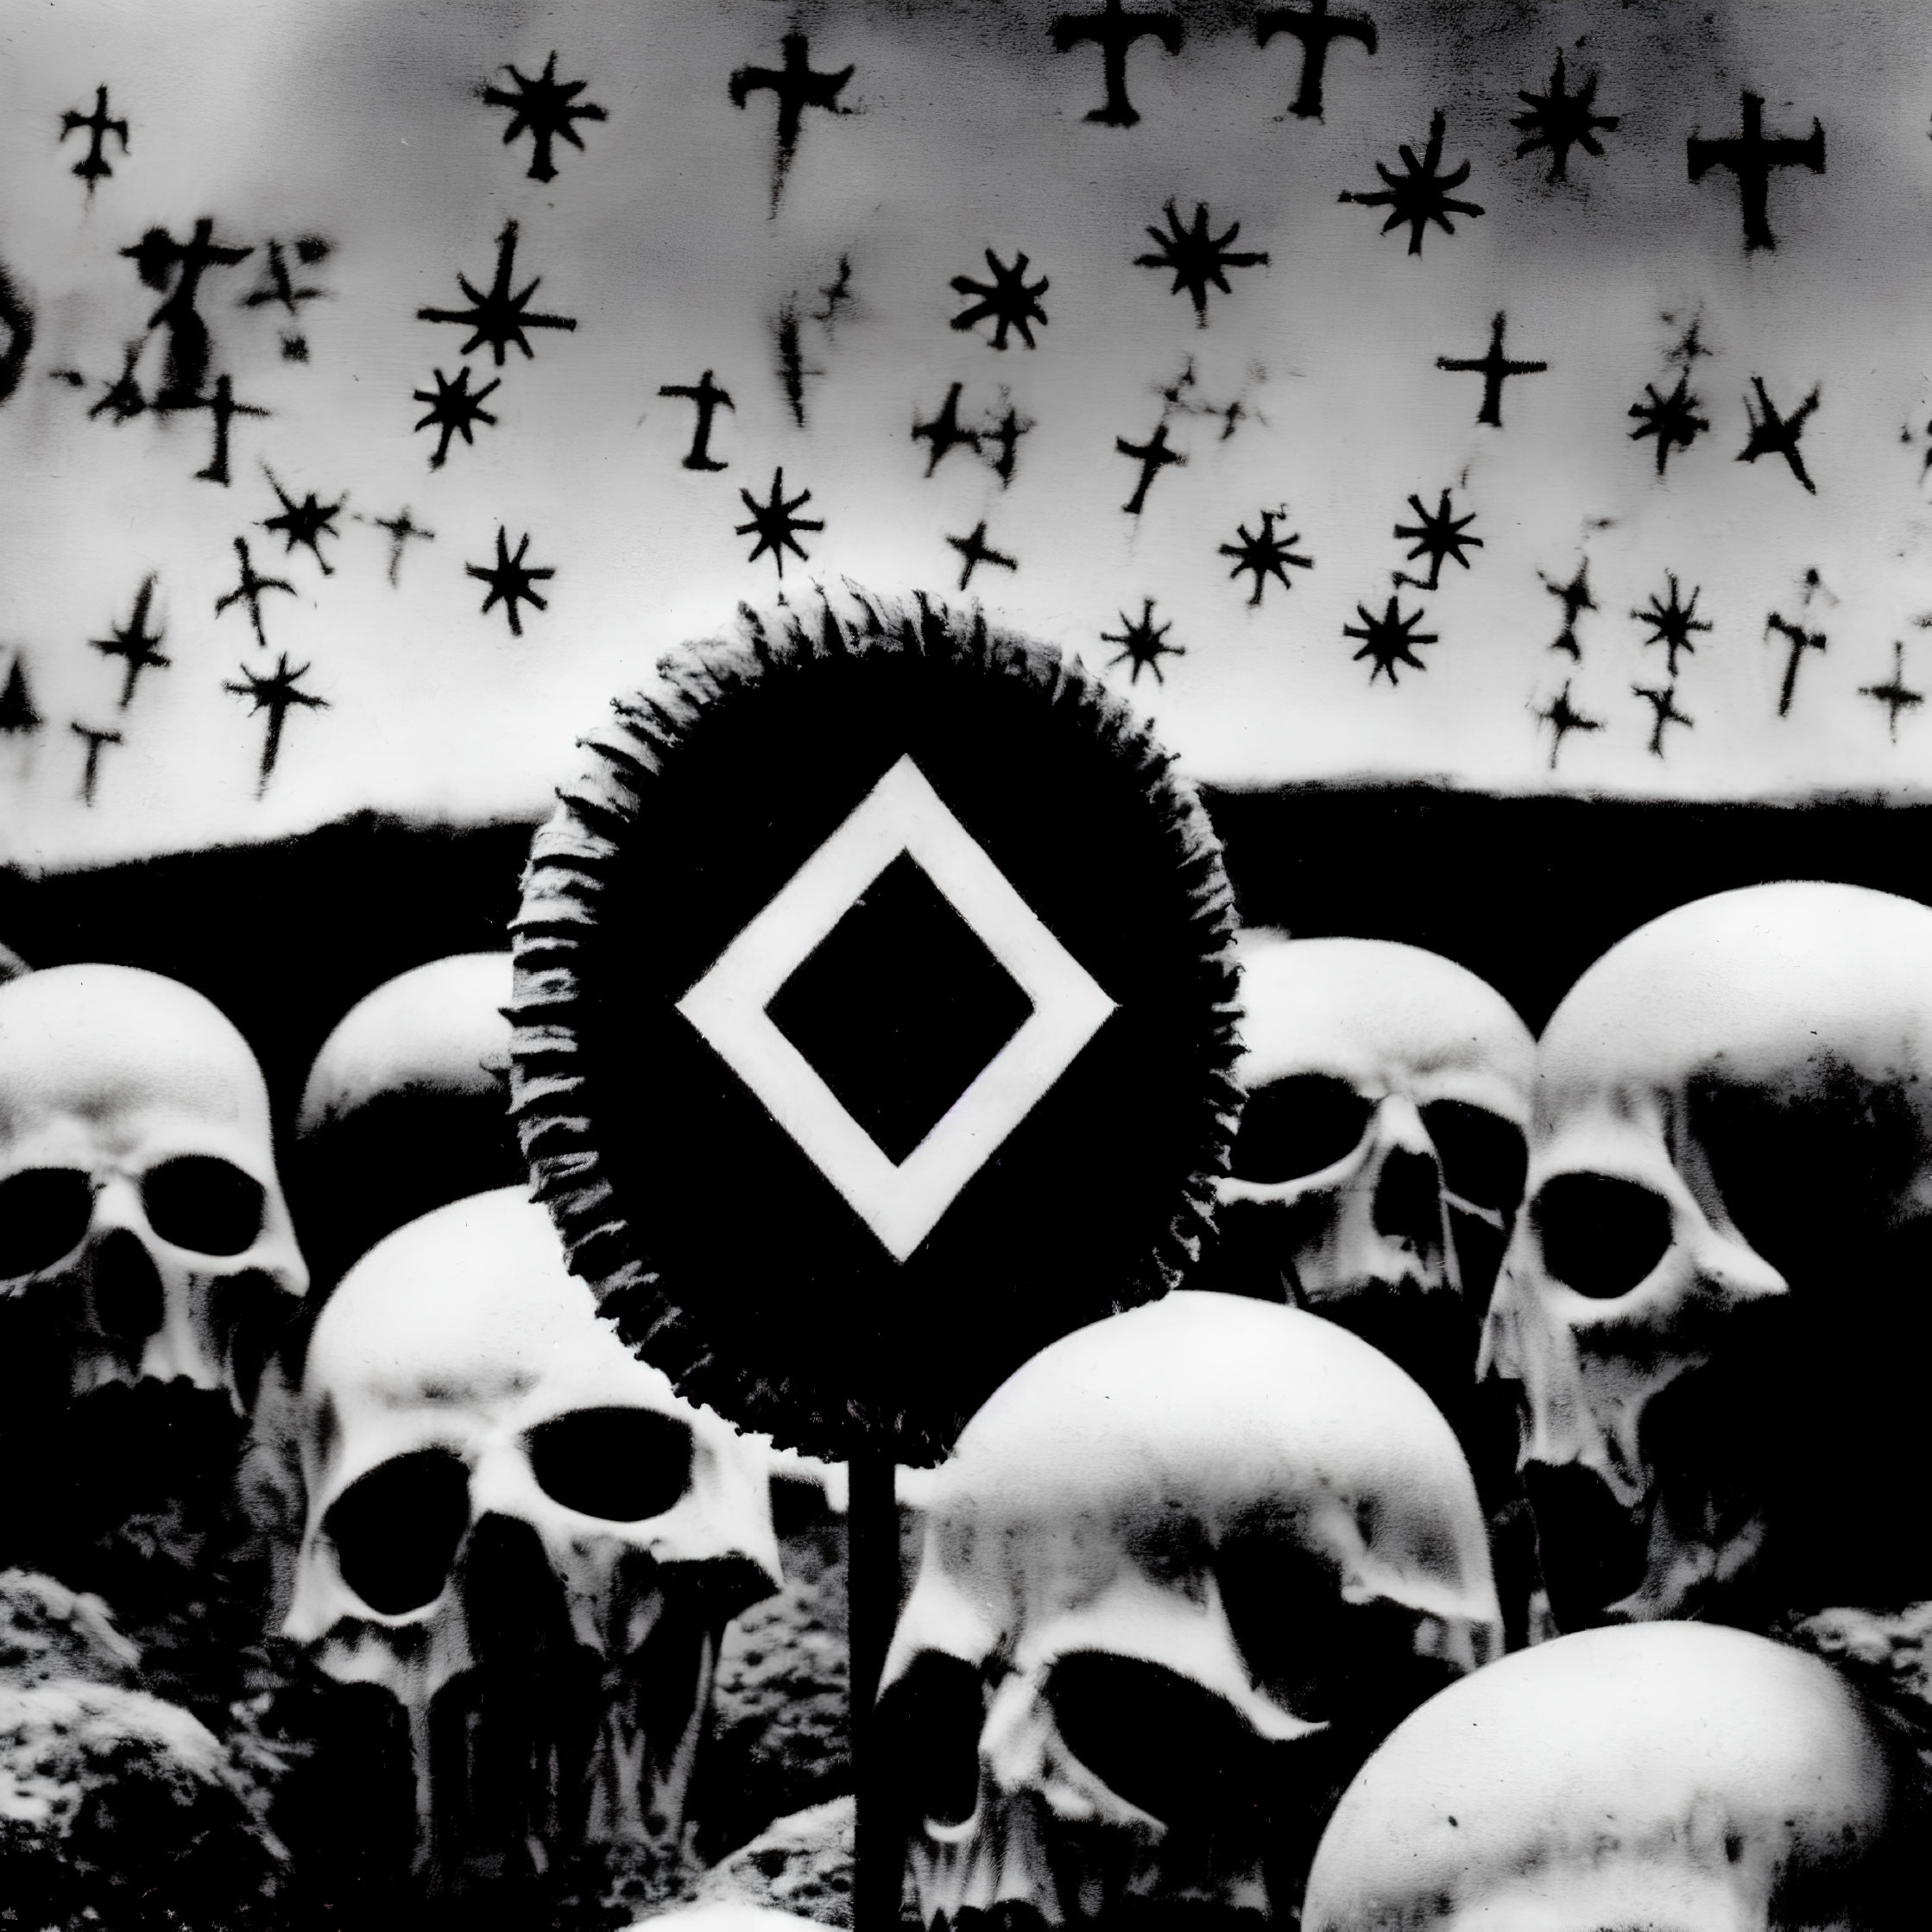 Monochrome artwork: Skull-filled field with emblem and crosses.